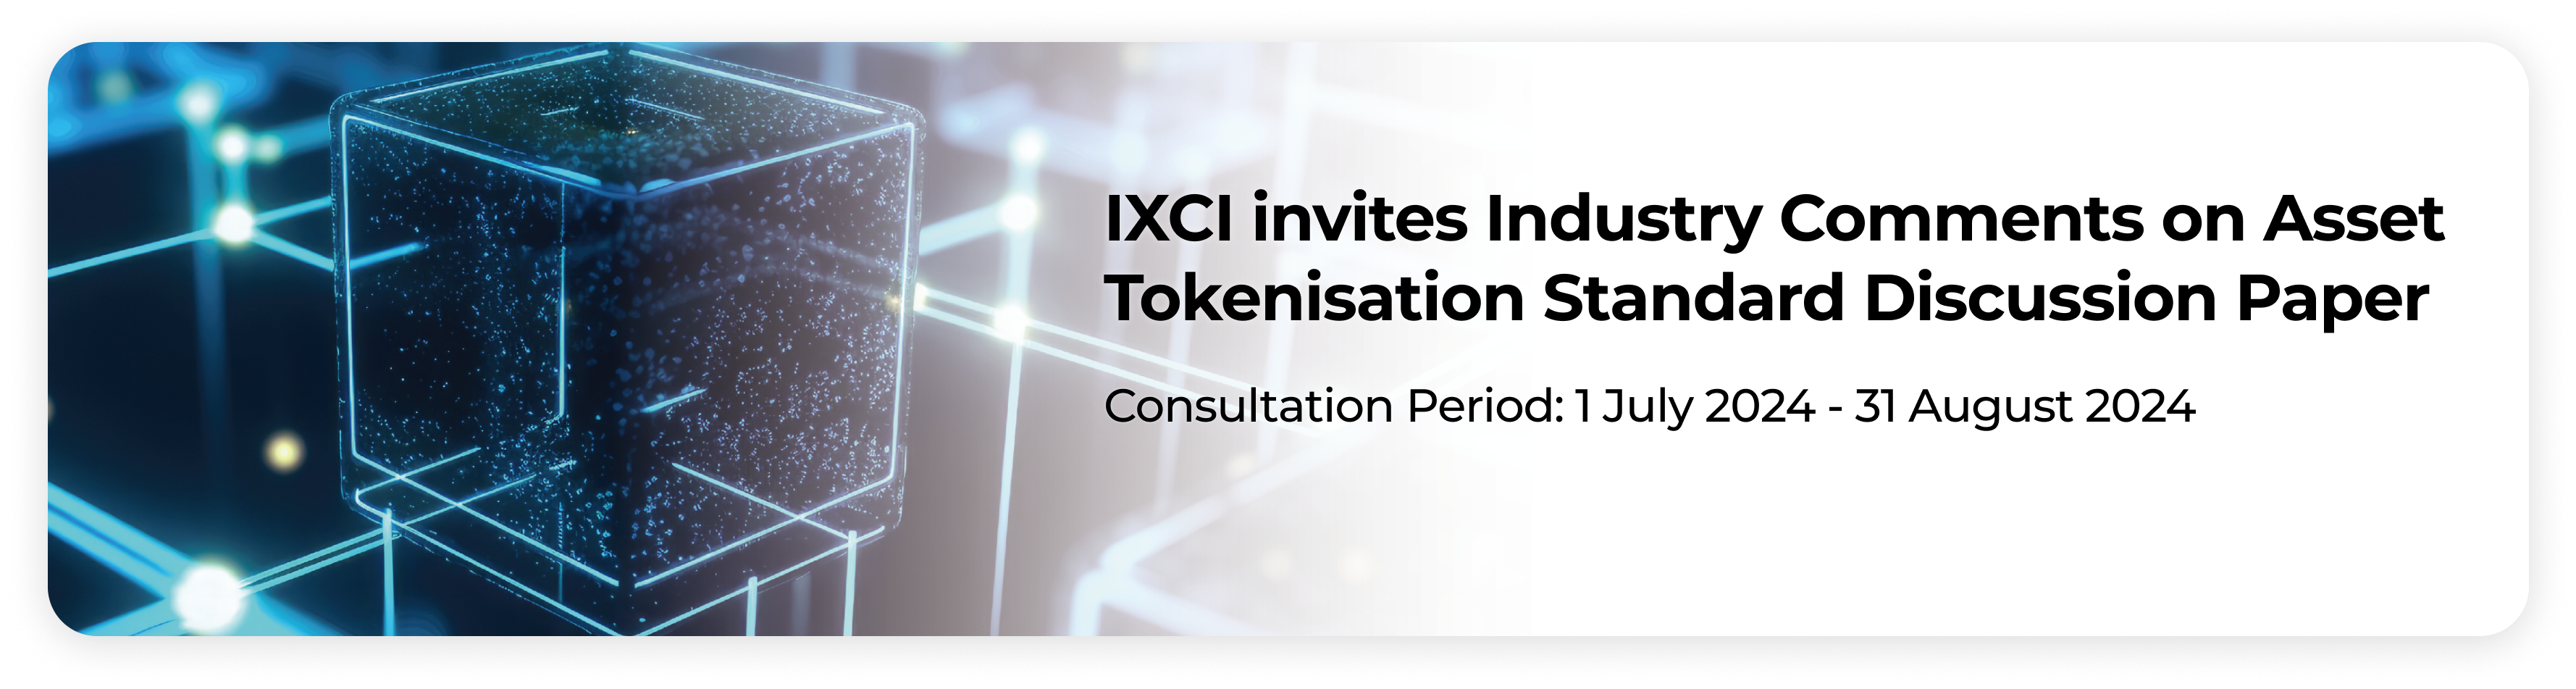 IXCI invites Industry Comments on Asset Tokenisation Standard Discussion Paper